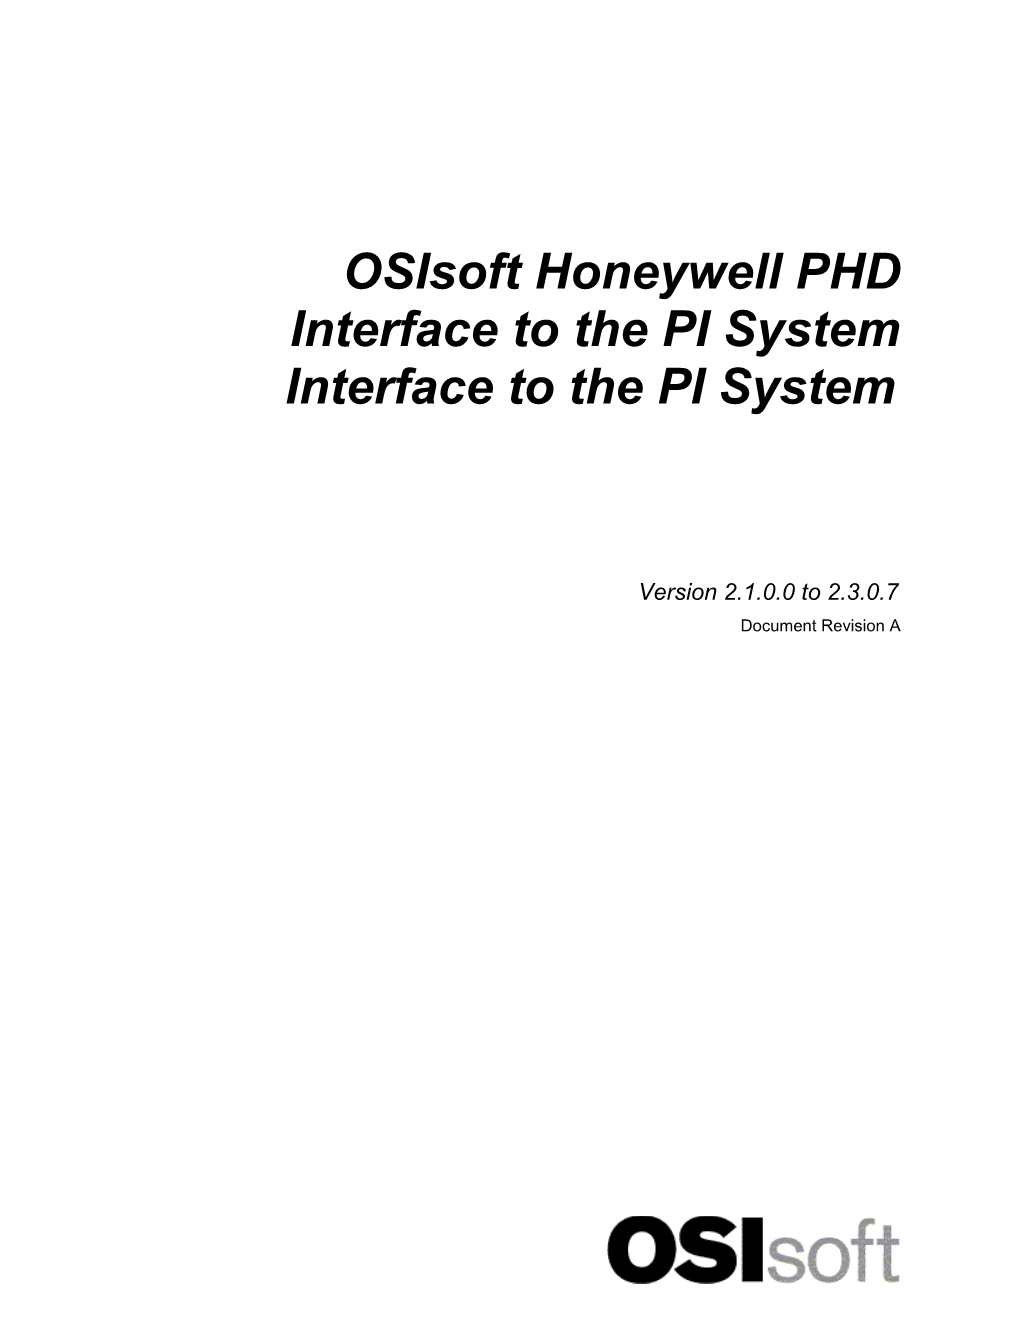 Osisoft Honeywell PHD Interface to the PI System